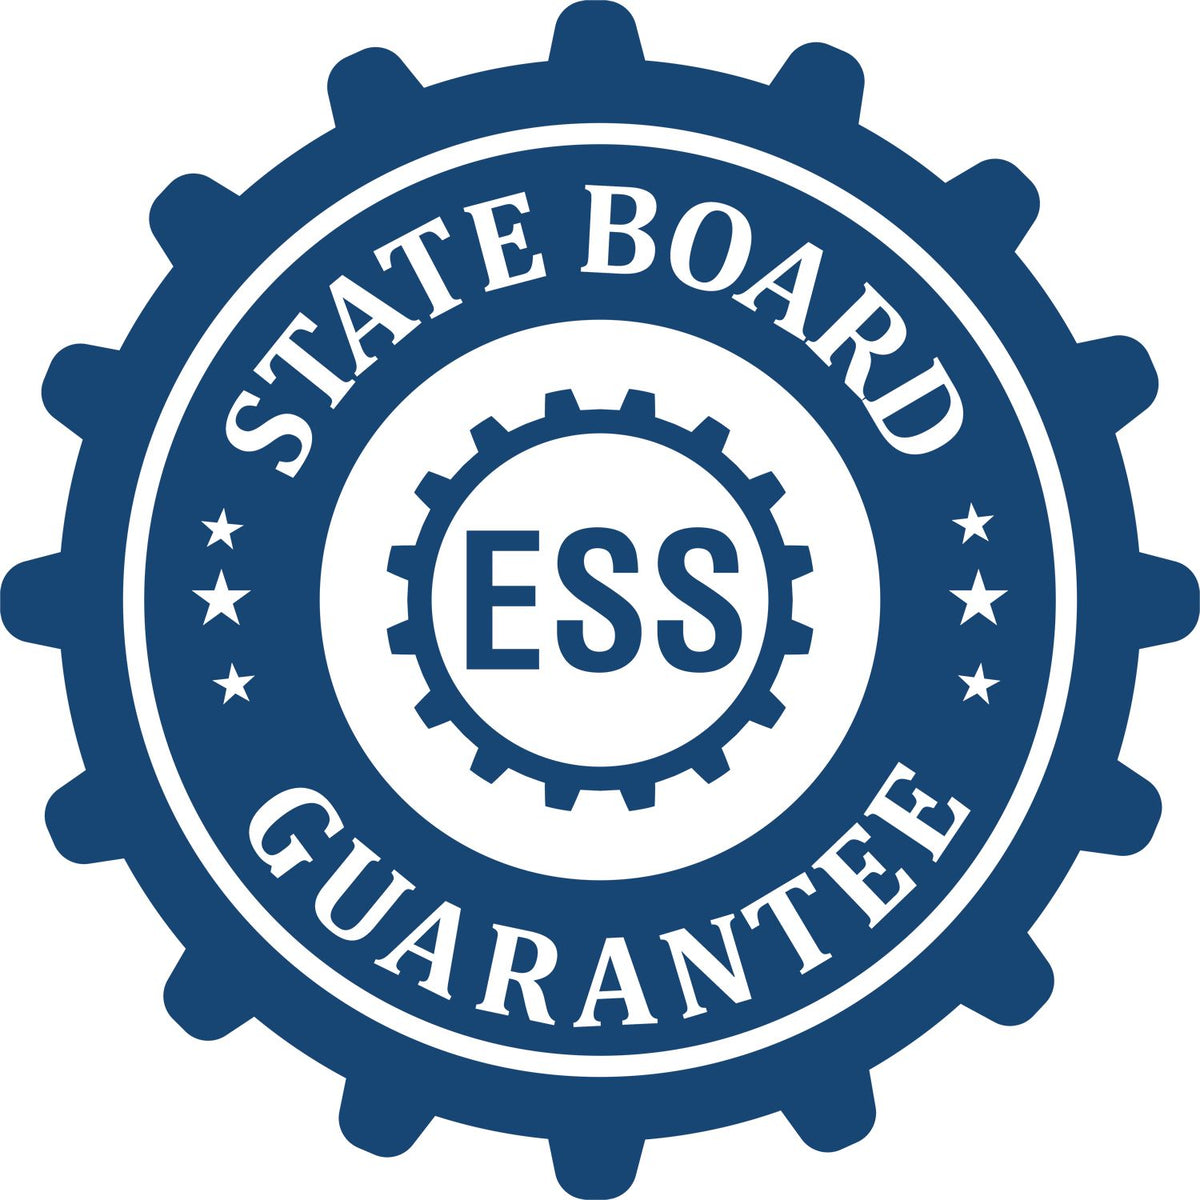 An emblem in a gear shape illustrating a state board guarantee for the Florida Desk Architect Embossing Seal product.